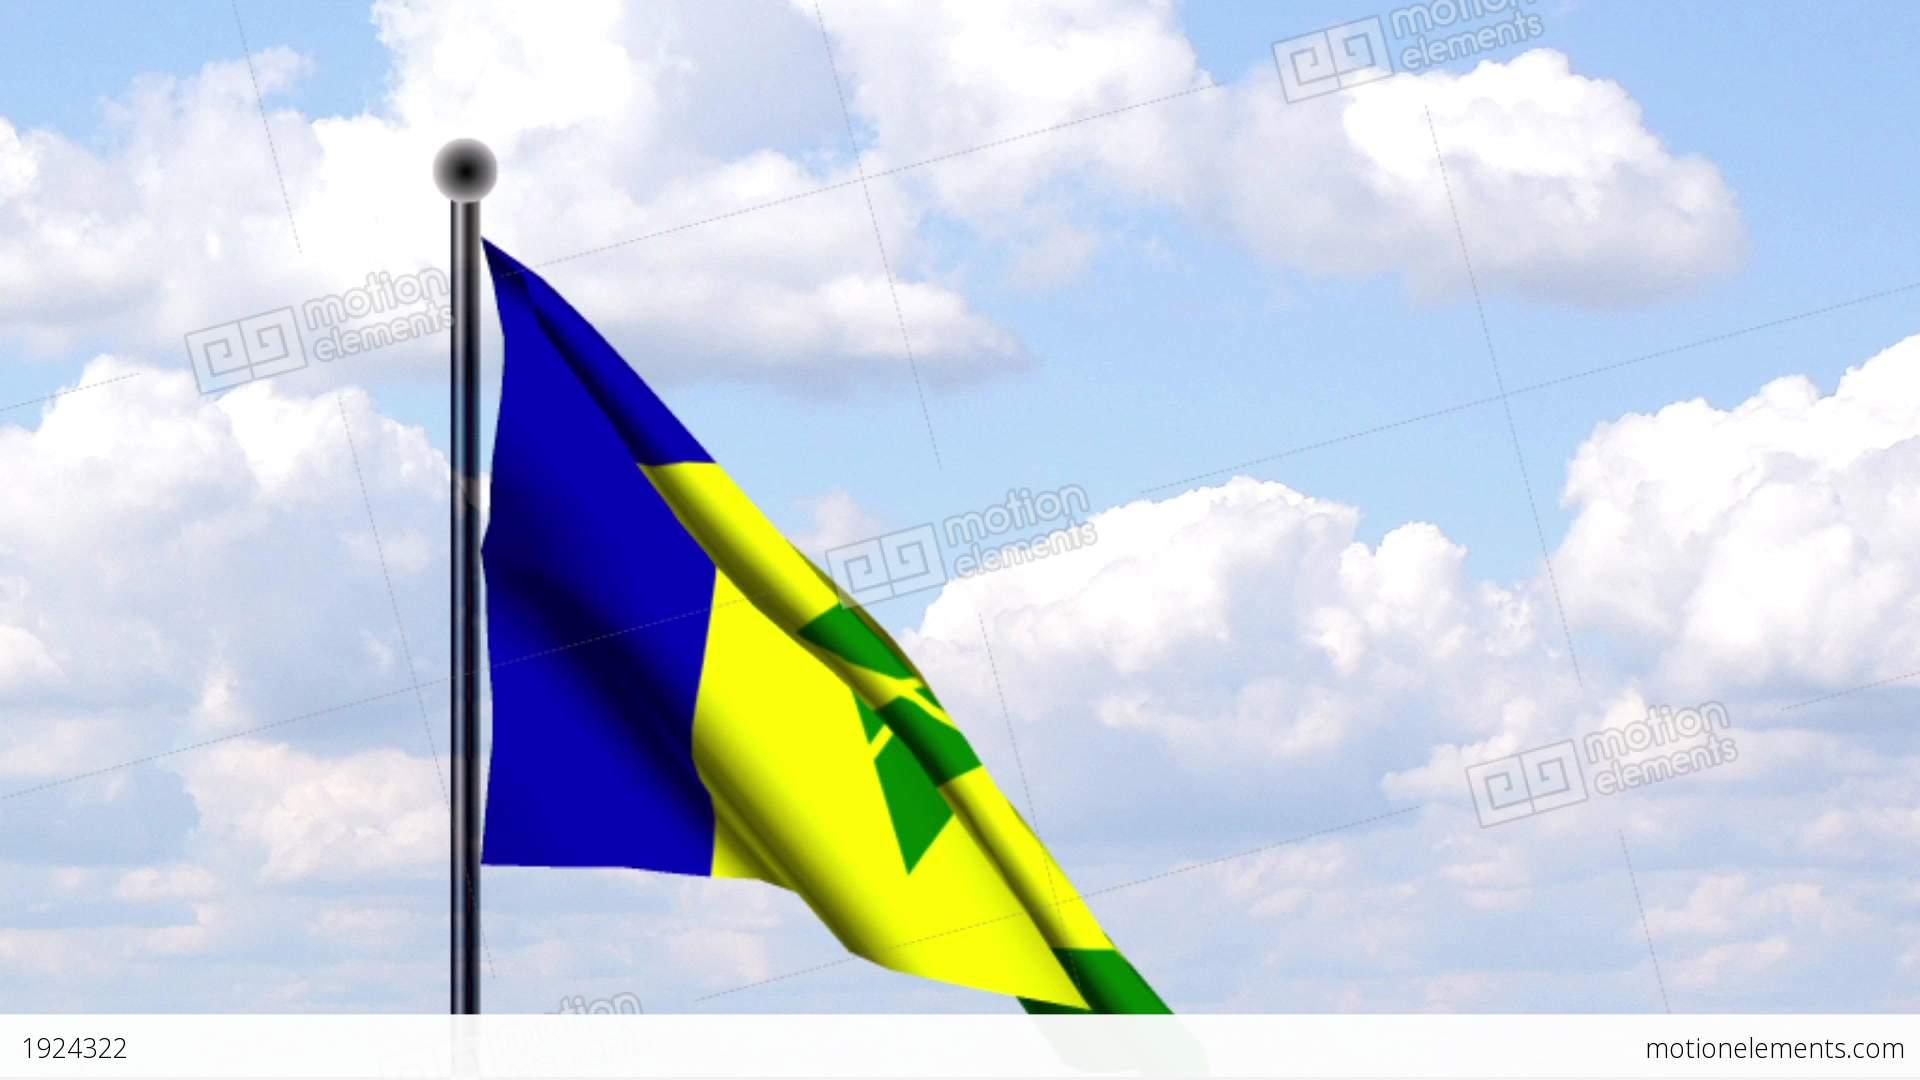 St Vincent And The Grenadines Flag Picture Of Flag Imageco.Org